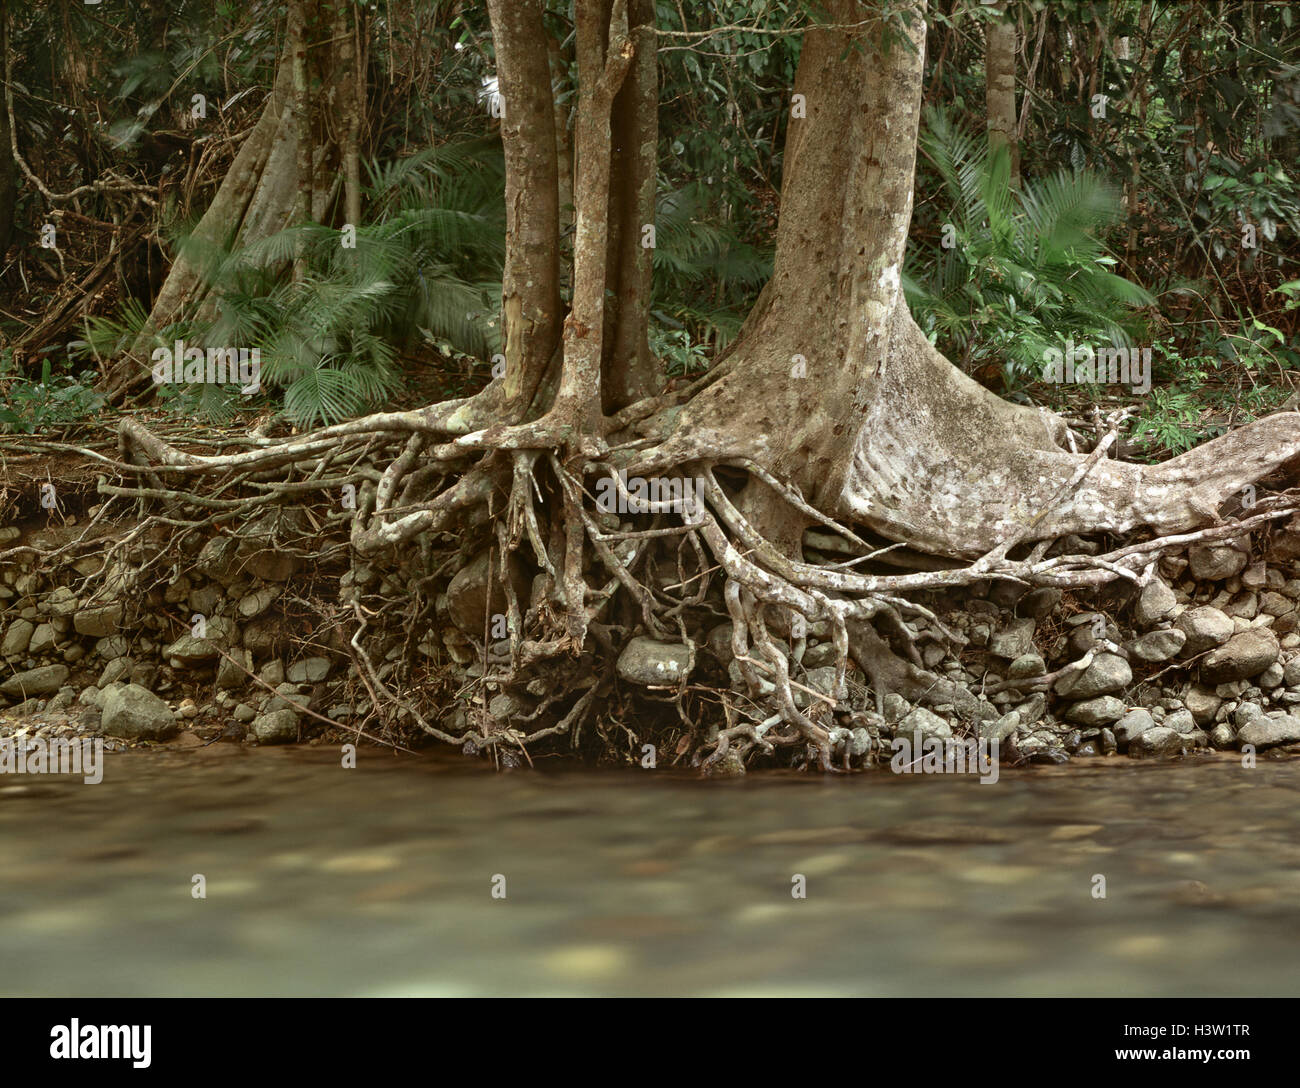 Lowland tropical rainforest, with buttress tree roots Stock Photo